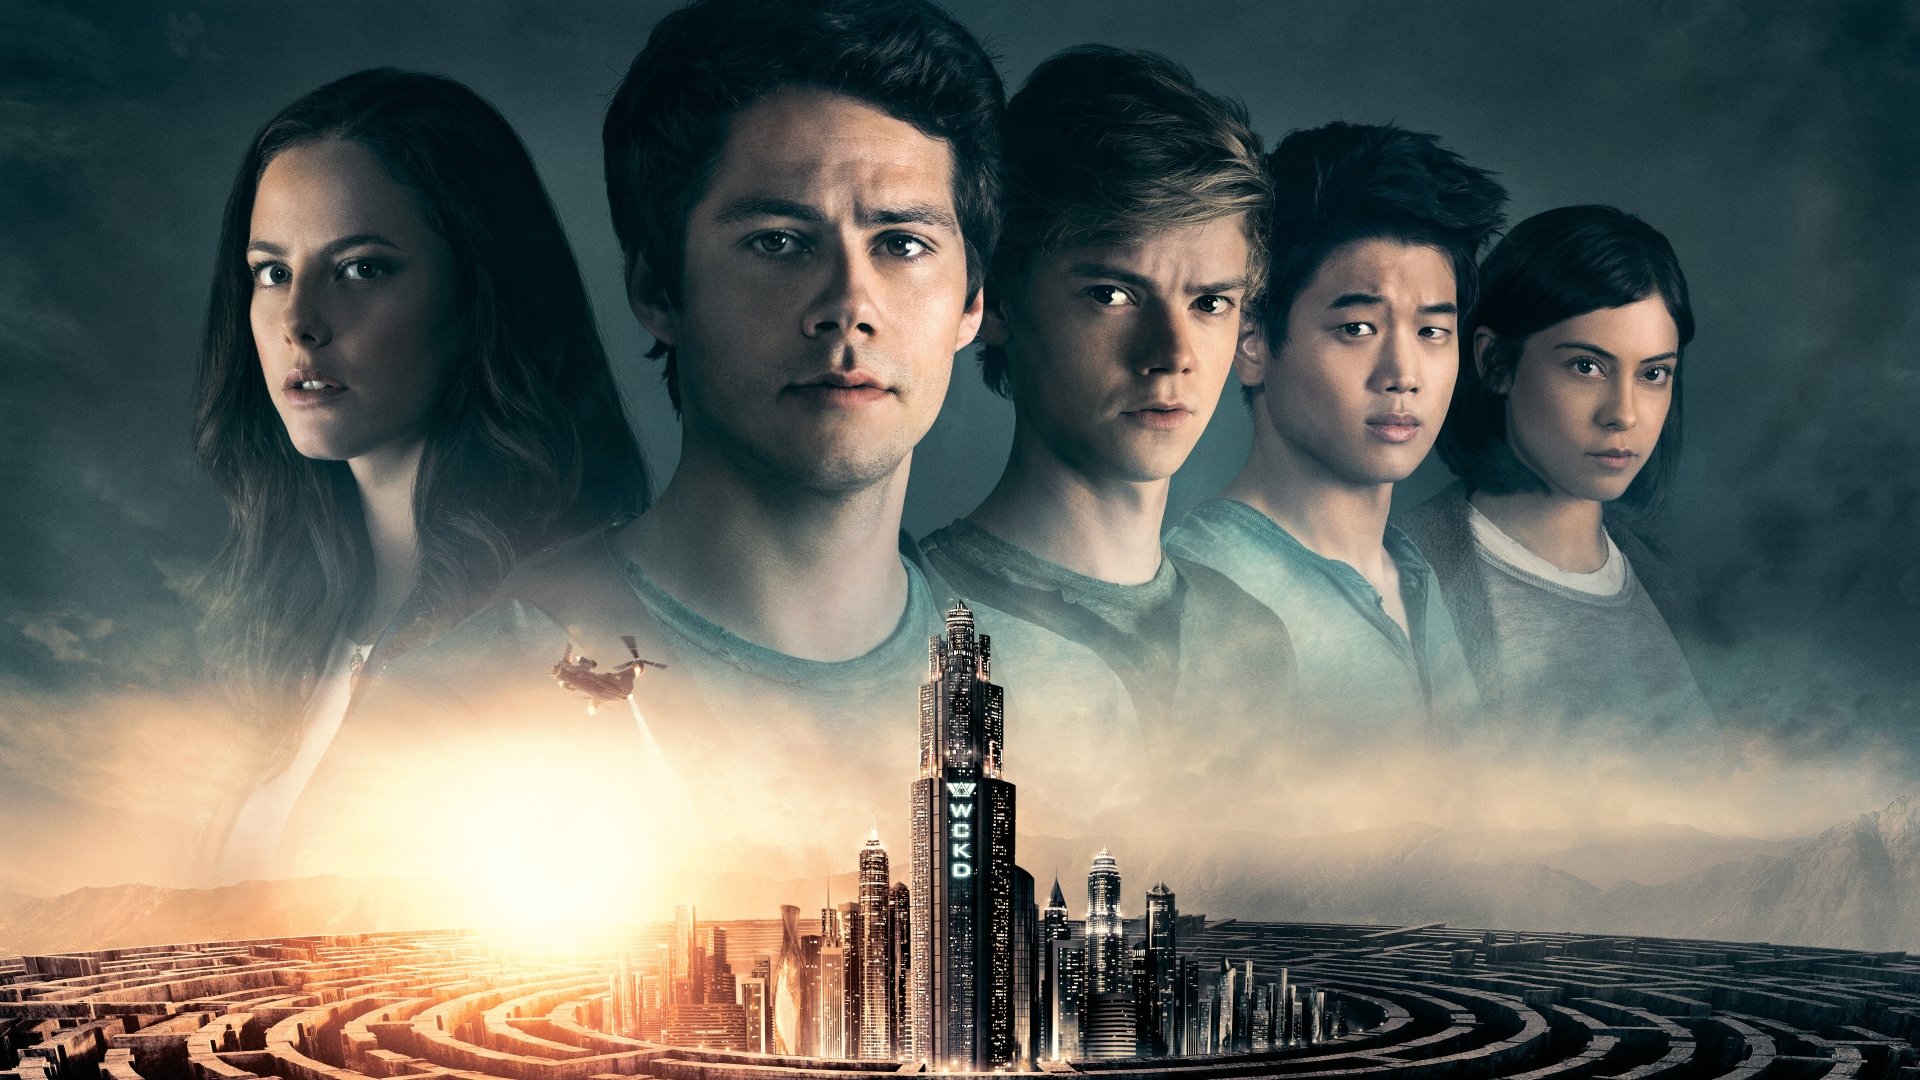 619 Maze Runner 3: The Death Cure Photos & High Res Pictures - Getty Images